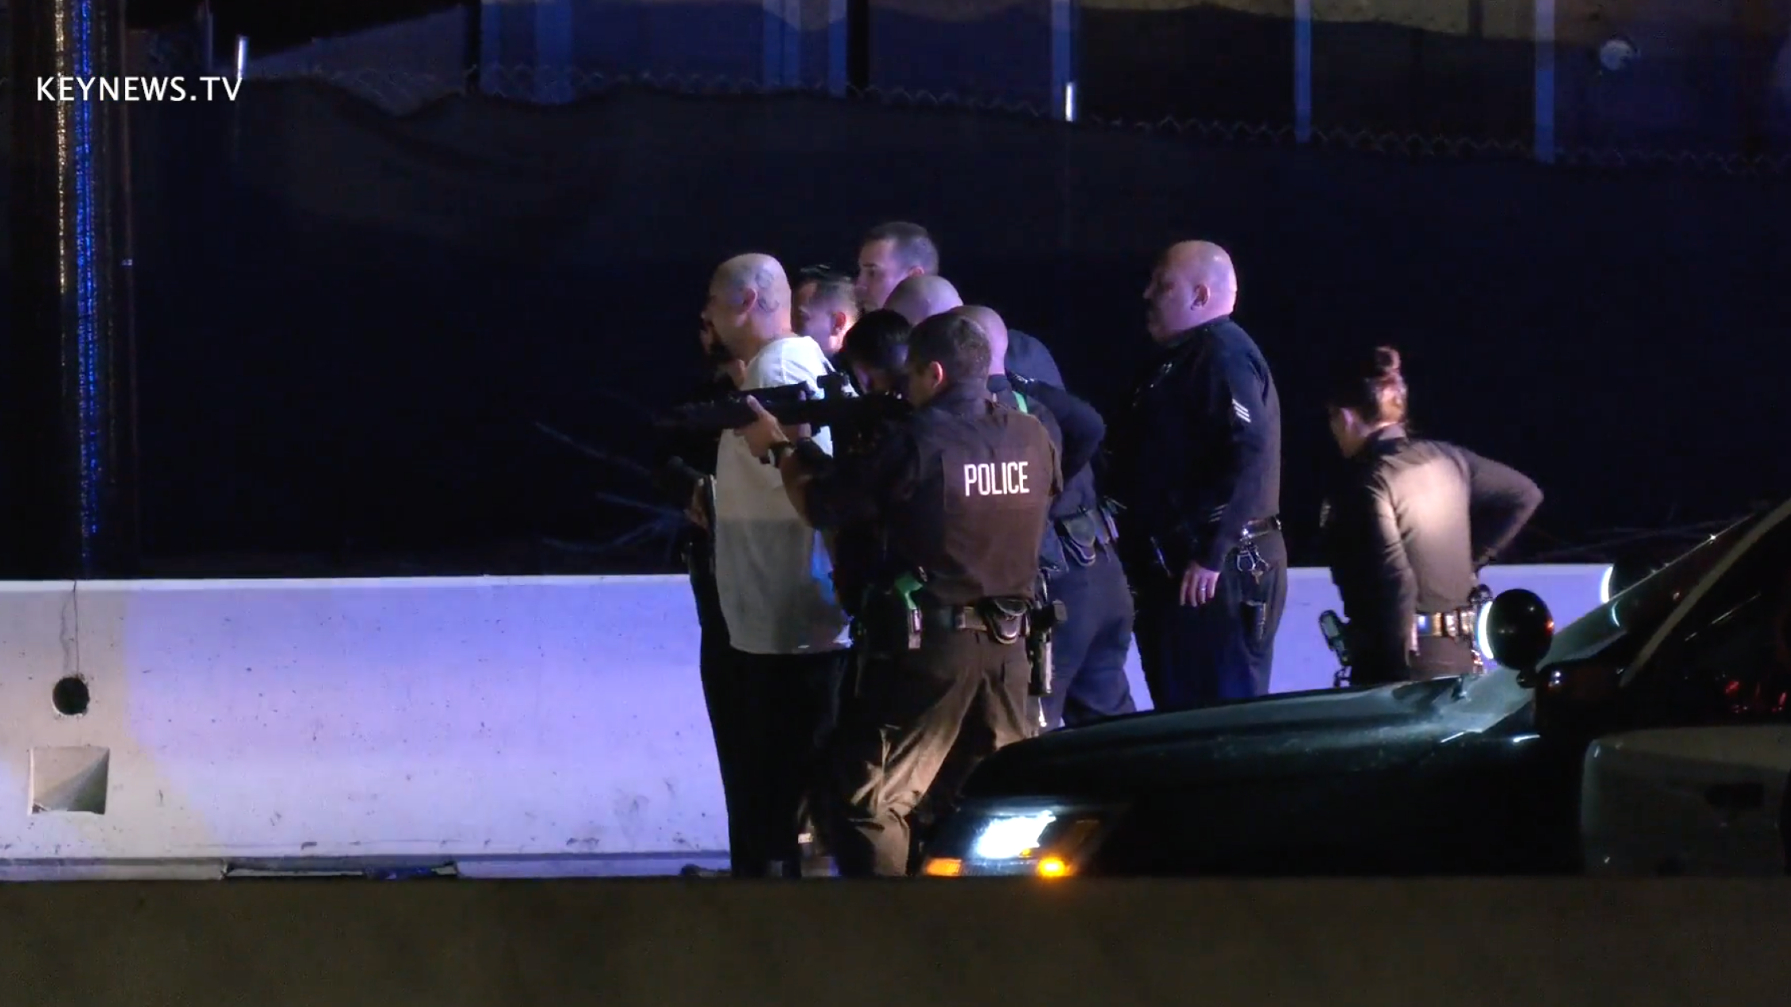 A driver is handcuffed following a lengthy pursuit that wound its way through Los Angeles County and ended on the 10 Freeway in Ontario in the early morning hours of Feb. 3, 2021. (KeyNews.TV)